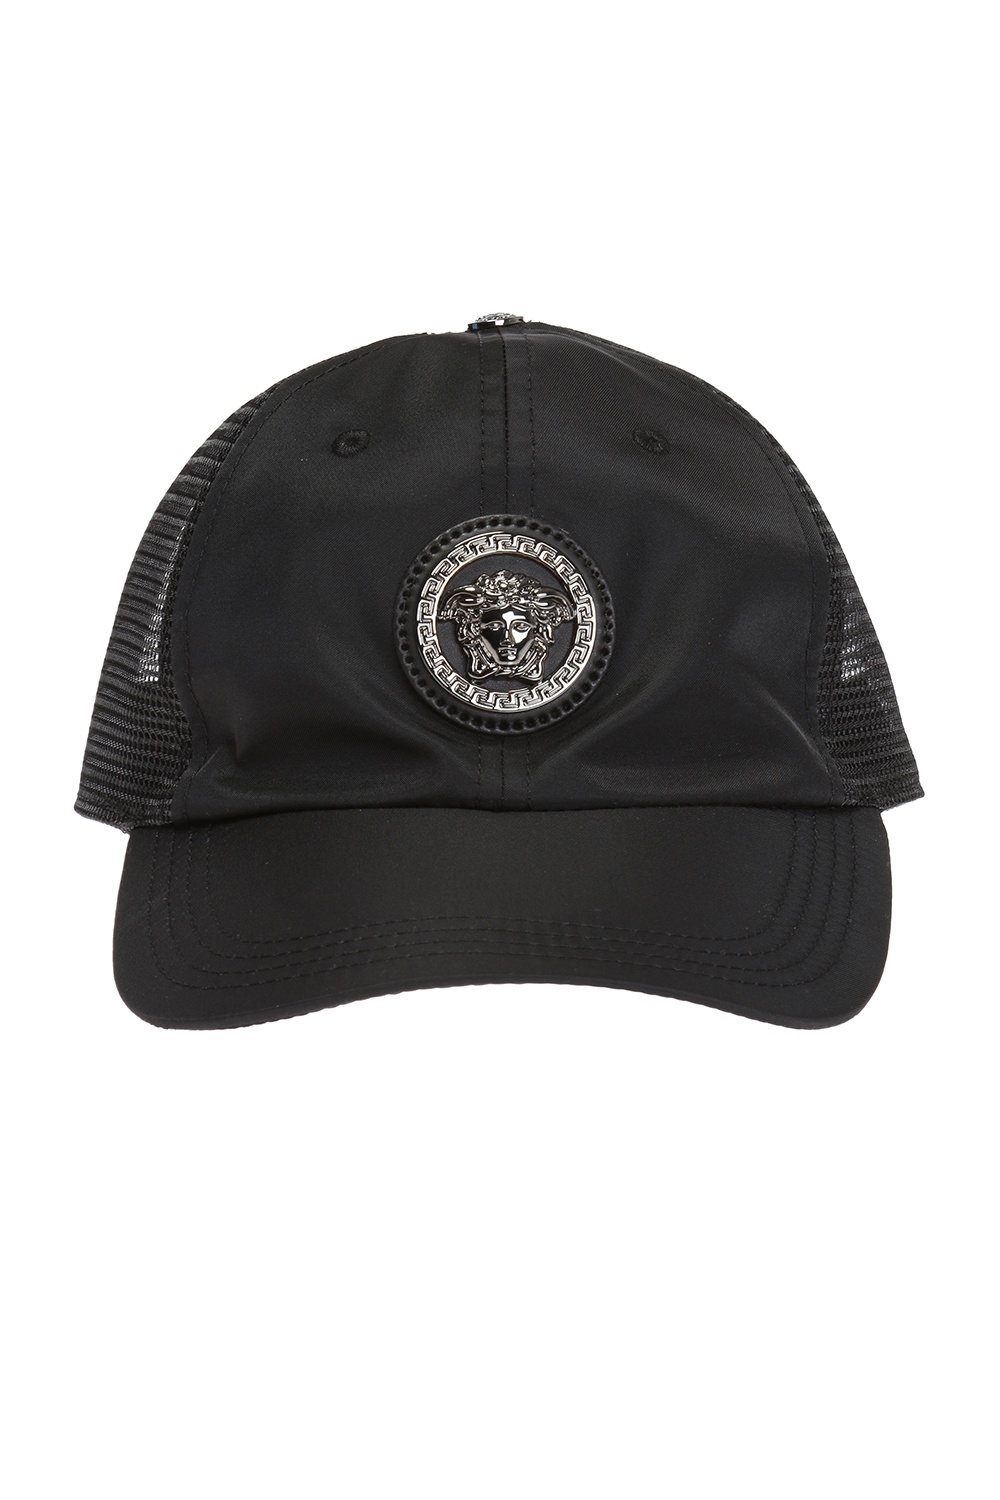 Versace Jeans Couture V Logo Baseball Cap Adjustable-One Size for Mens  Black/Silver at  Men's Clothing store